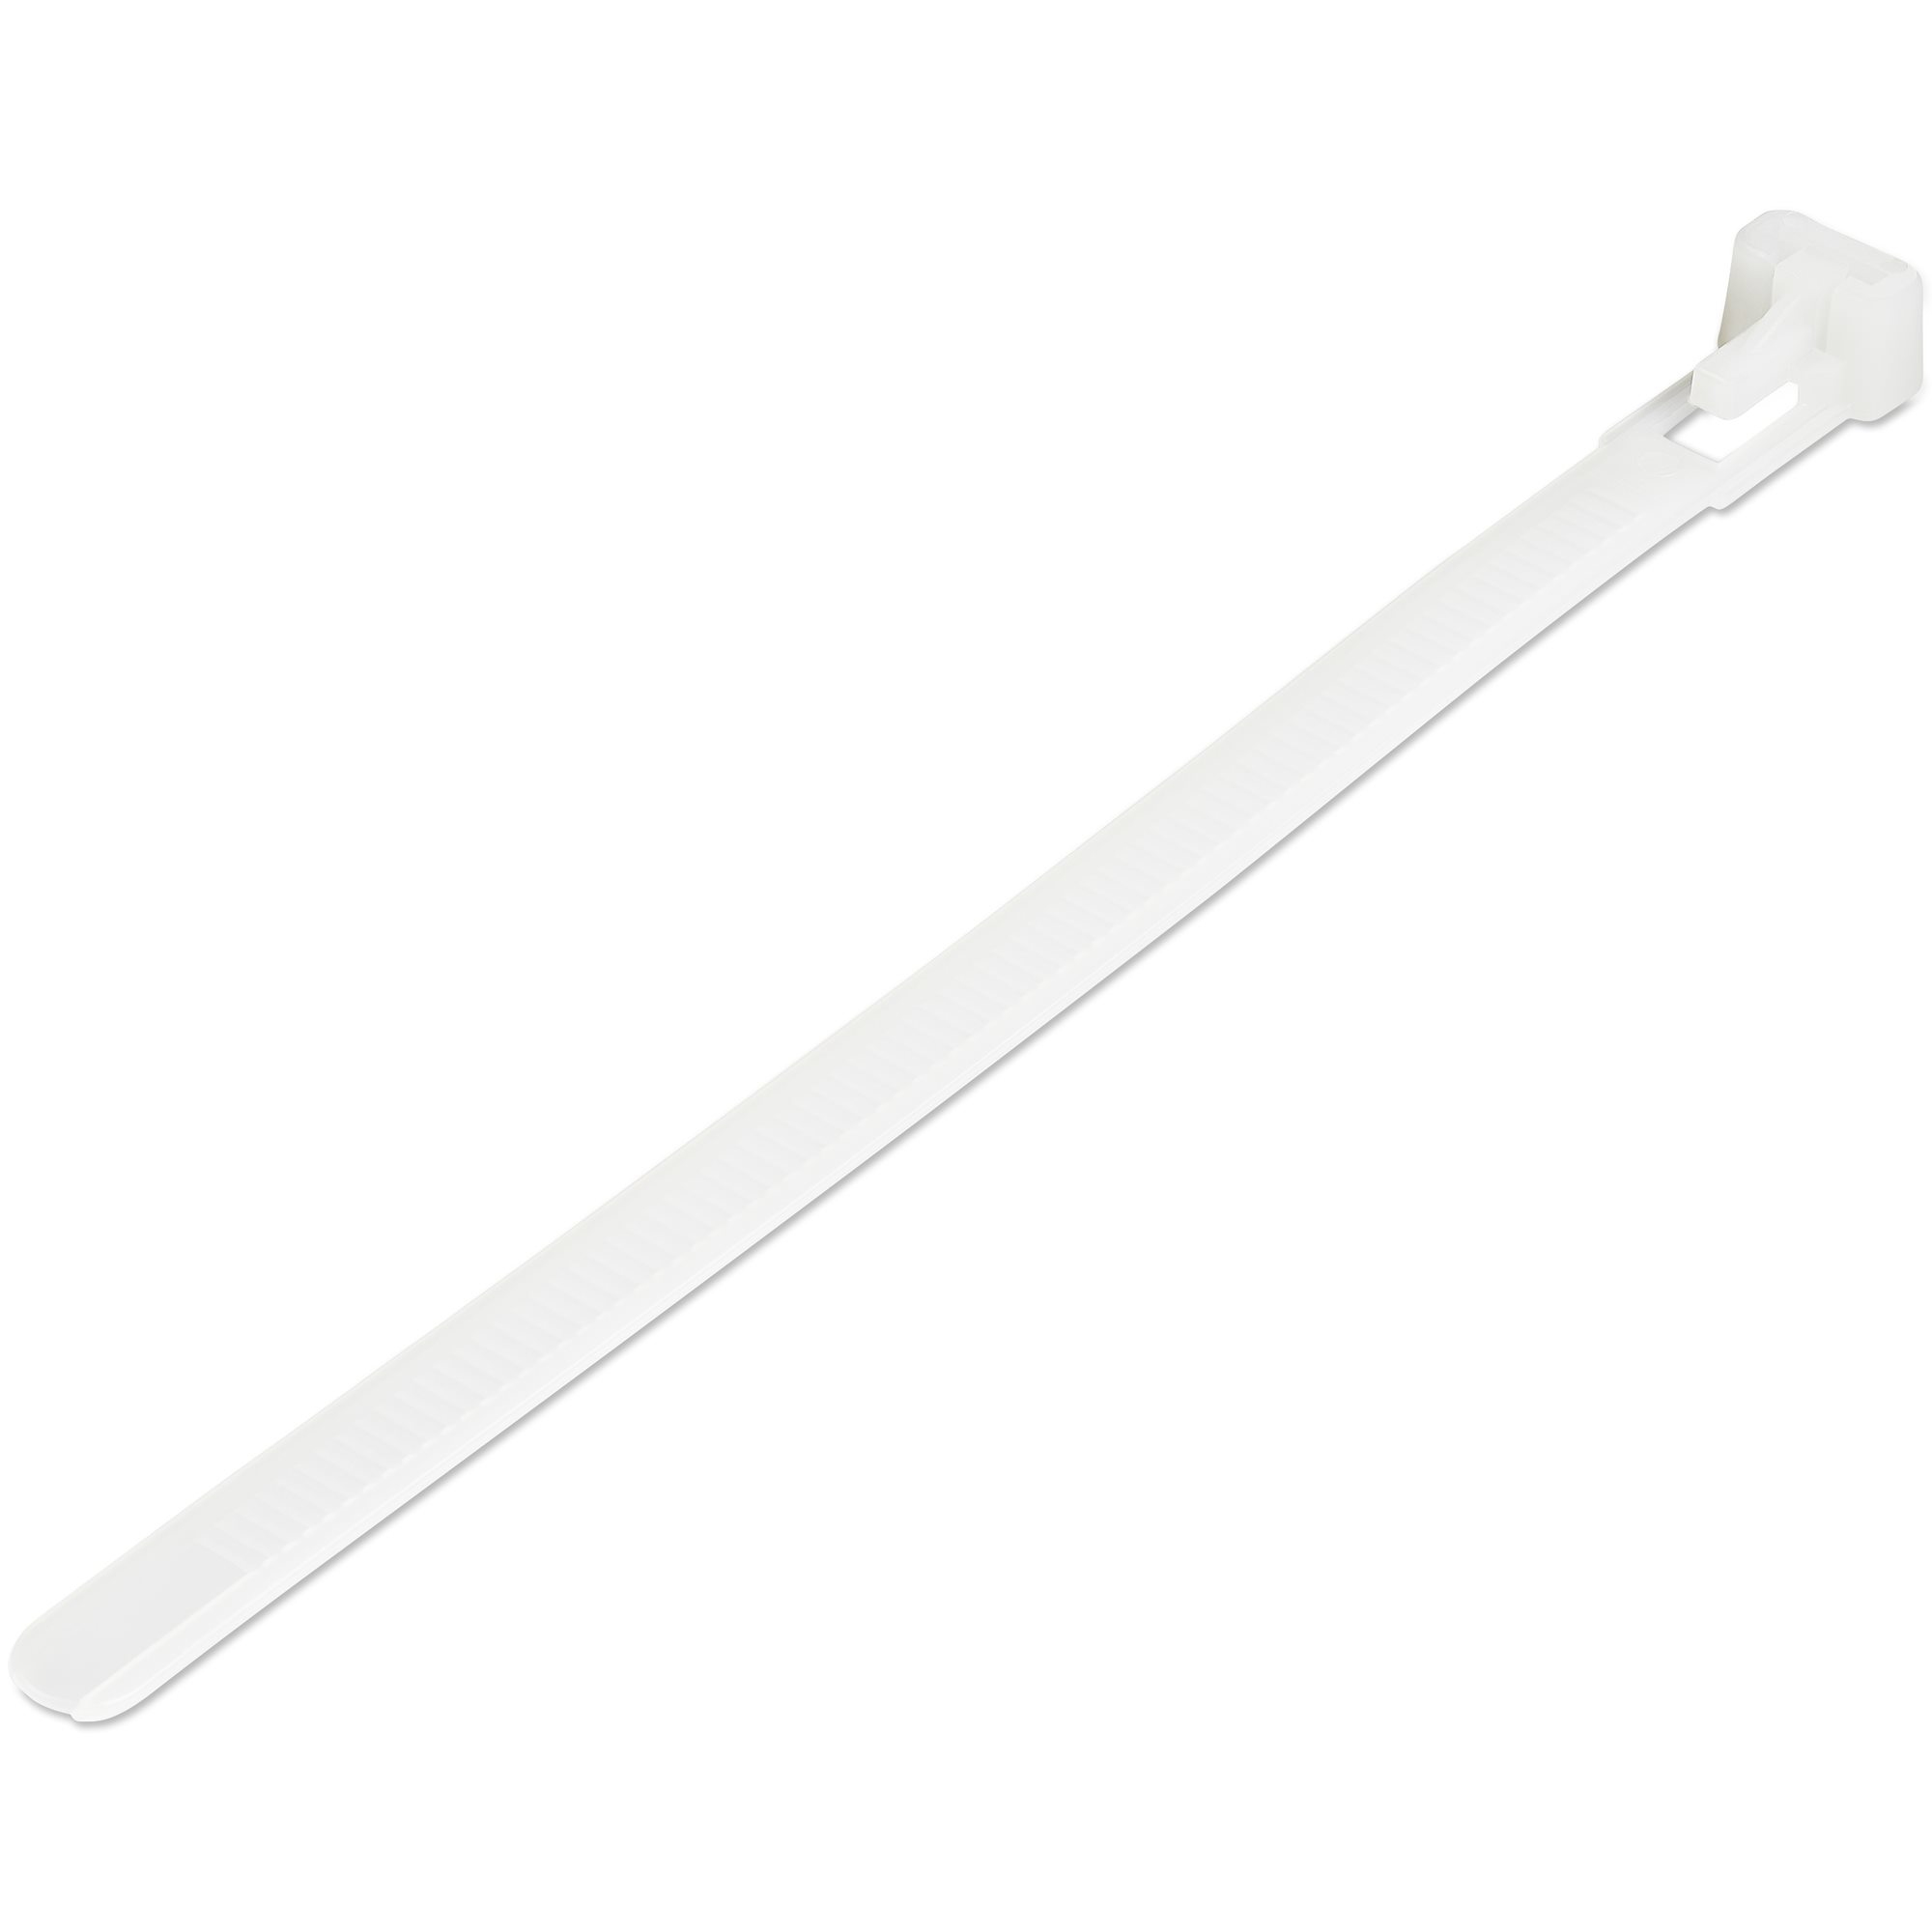 StarTech.com 15cm(6") Reusable Cable Ties, 7mm(1/4") wide, 35mm(1-3/8") Bundle Dia. 22kg(50lb) Tensile Strength, Releasable Nylon Ties, Indoor/Outdoor, 94V-2/UL Listed, 100 Pack, White - Nylon 66 Plastic - TAA (CBMZTRB6)